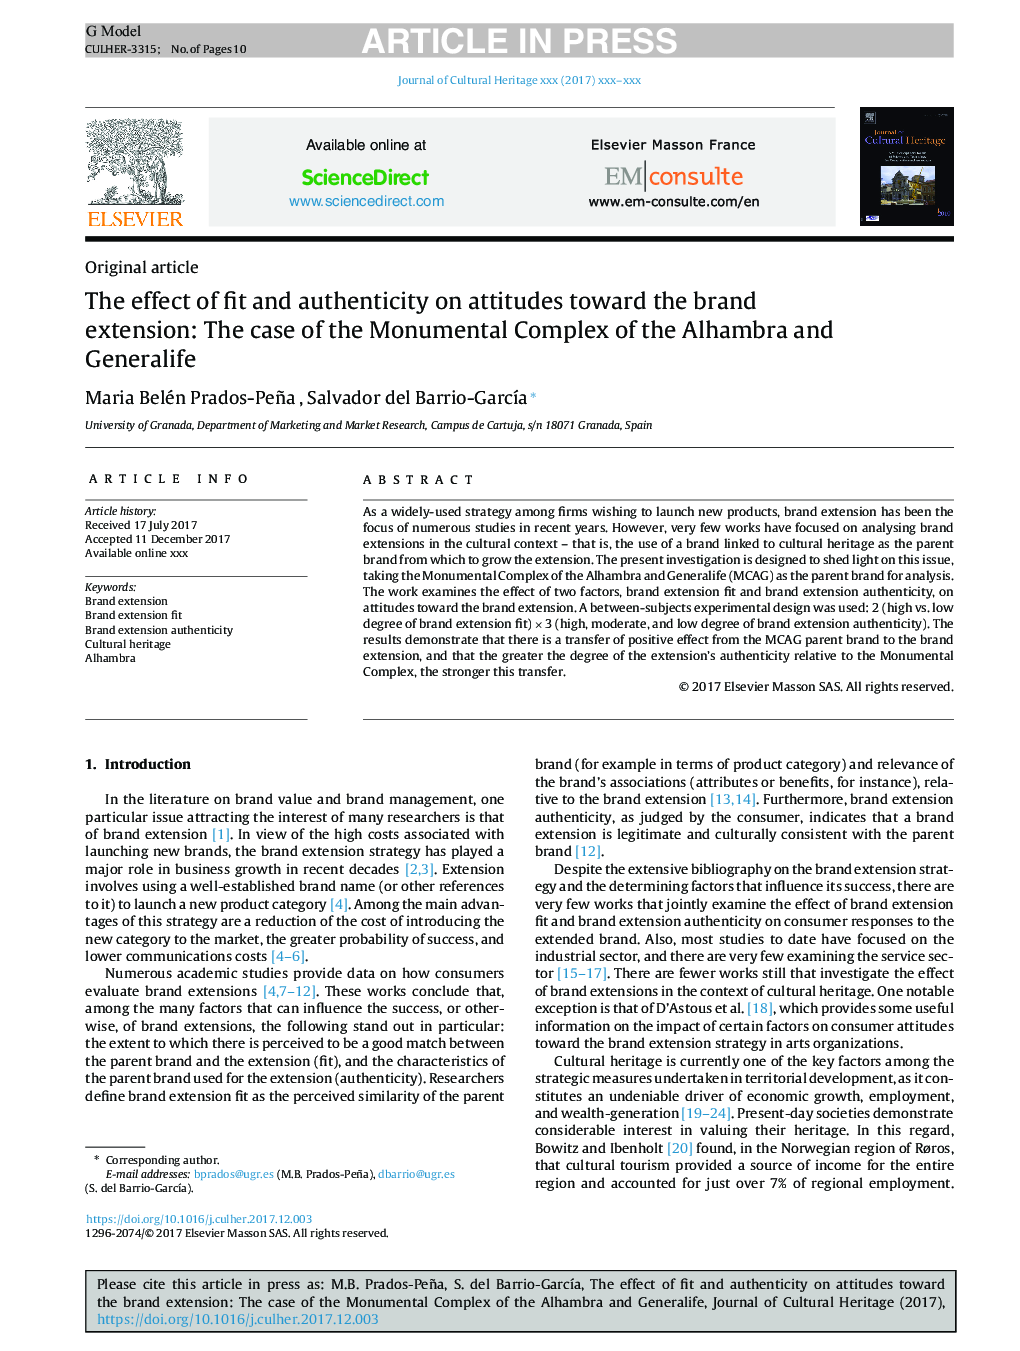 The effect of fit and authenticity on attitudes toward the brand extension: The case of the Monumental Complex of the Alhambra and Generalife